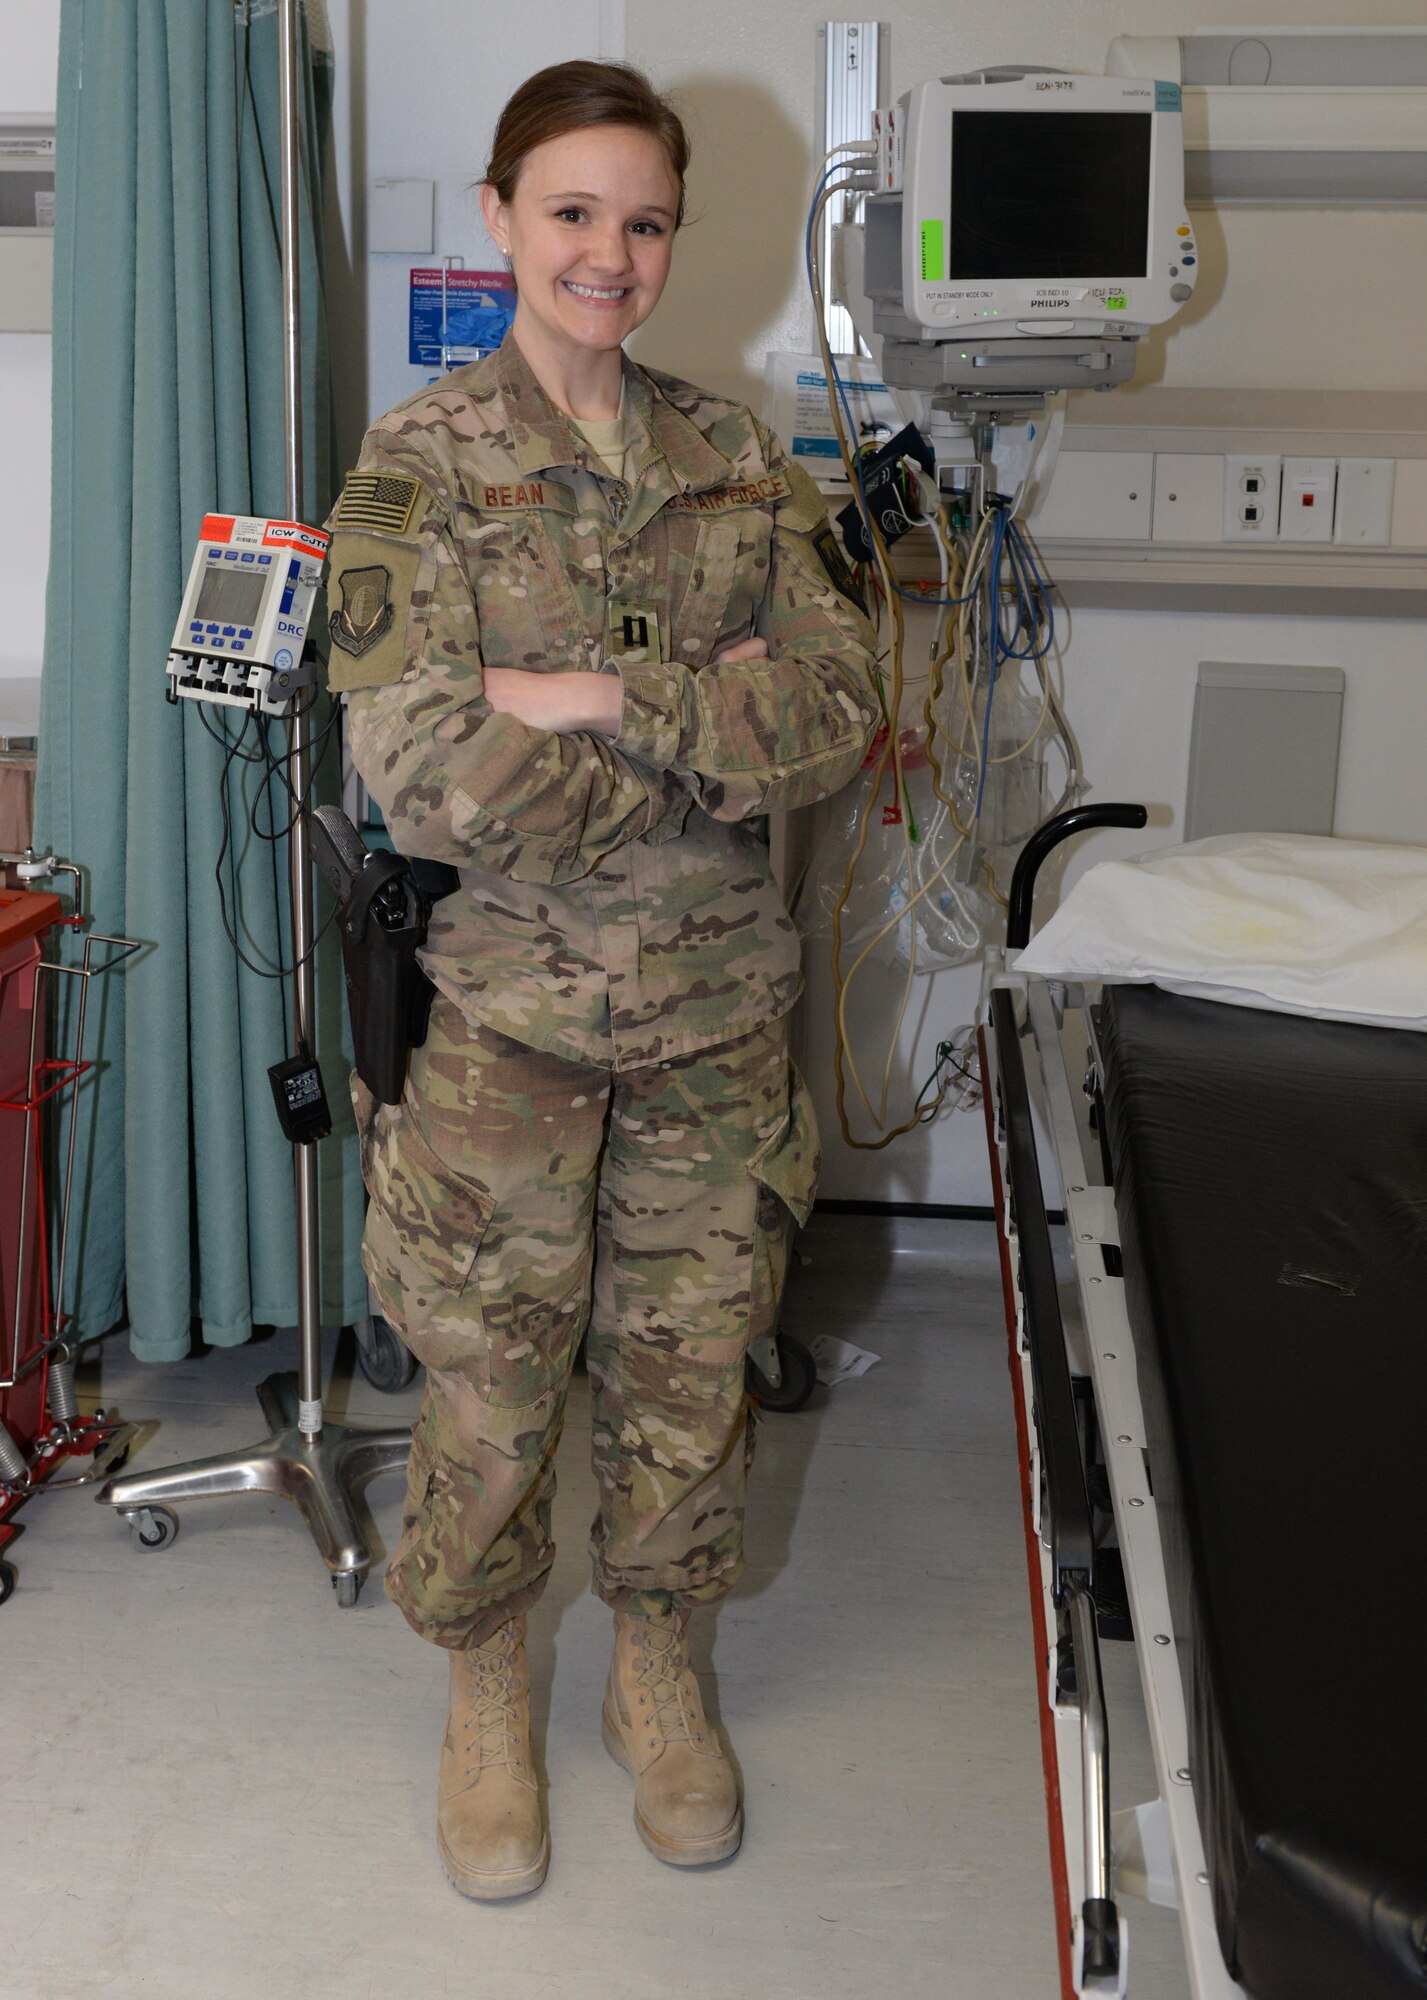 U.S. Air Force Capt. Mavis Bean, 455th Expeditionary Medical Operations Squadron clinical nurse, poses for a photo June 11, 2015, at Bagram Airfield, Afghanistan. Bean works in the intensive care unit at Afghanistan’s most advanced medical facility, the Craig Joint Theater Hospital, and is responsible for treating trauma patients. (U.S. Air Force photo by Senior Airmen Cierra Presentado/Released)